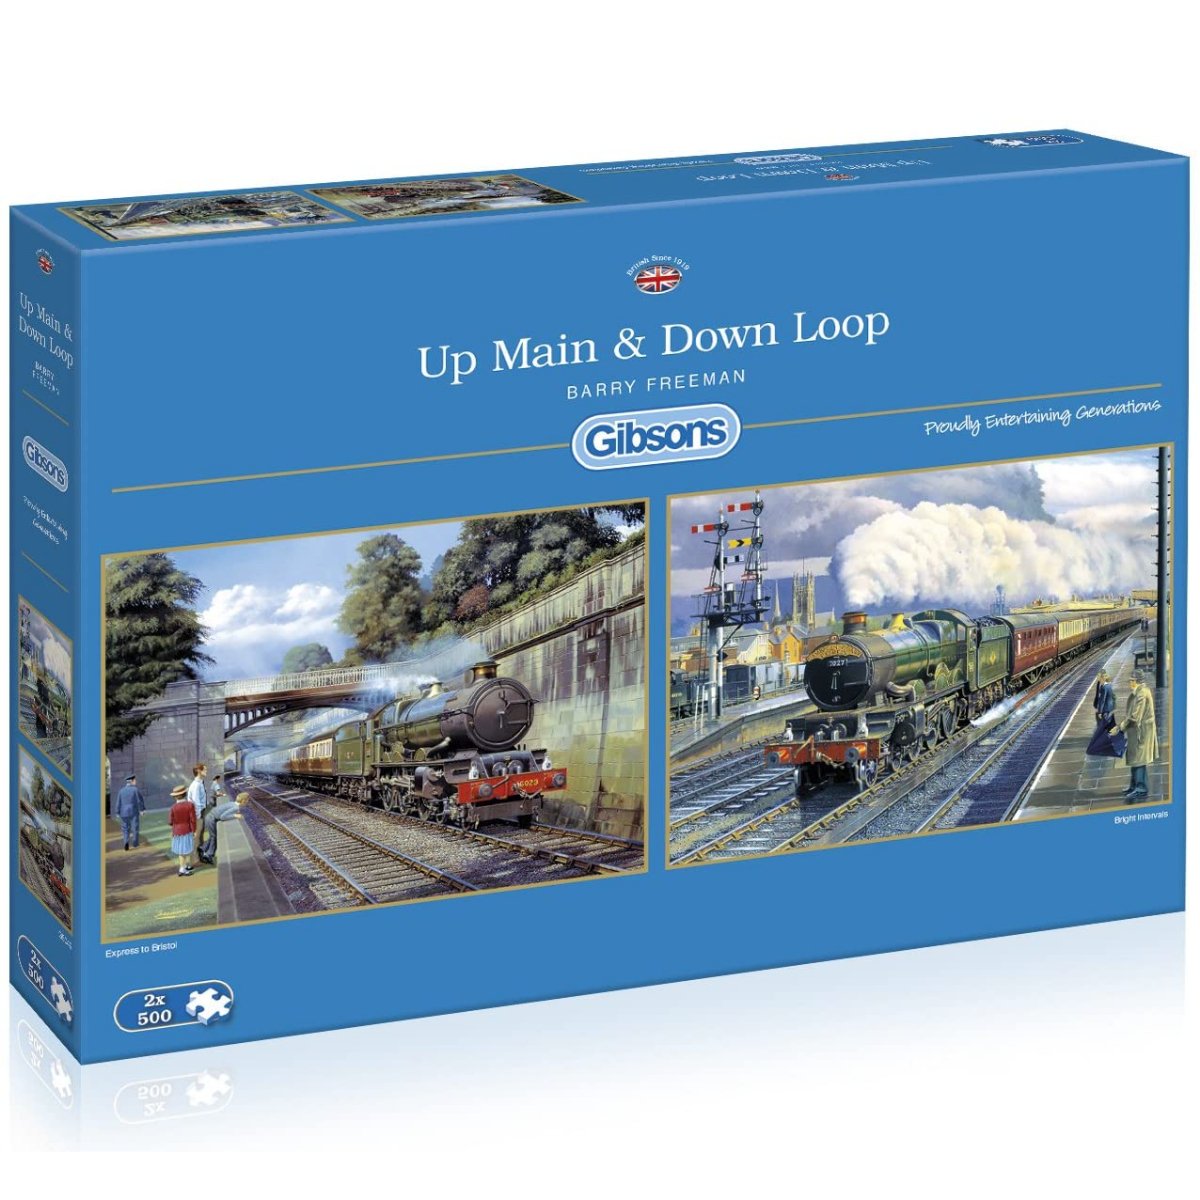 Gibsons Up Main & Down Loop Jigsaw Puzzle (2x 500 Pieces)